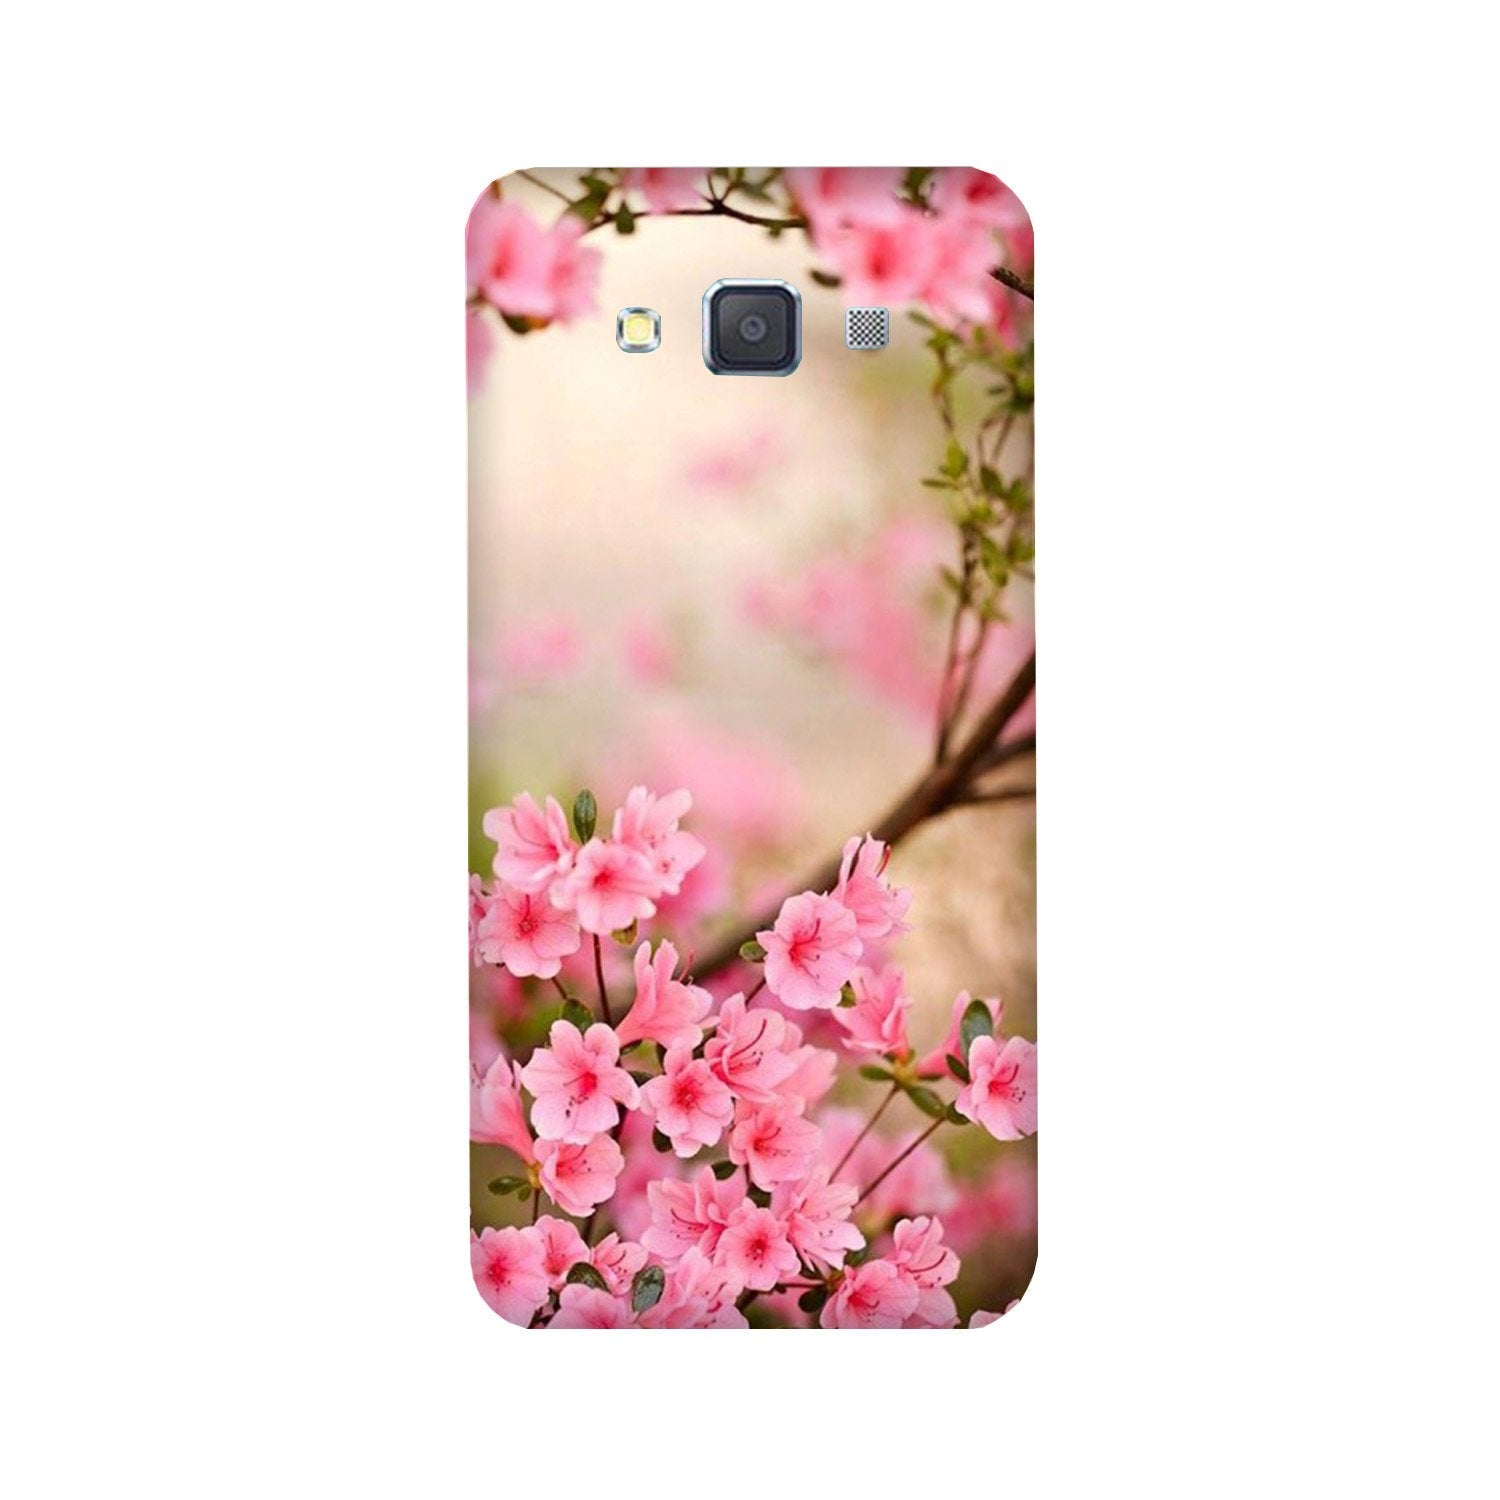 Pink flowers Case for Galaxy Grand 2